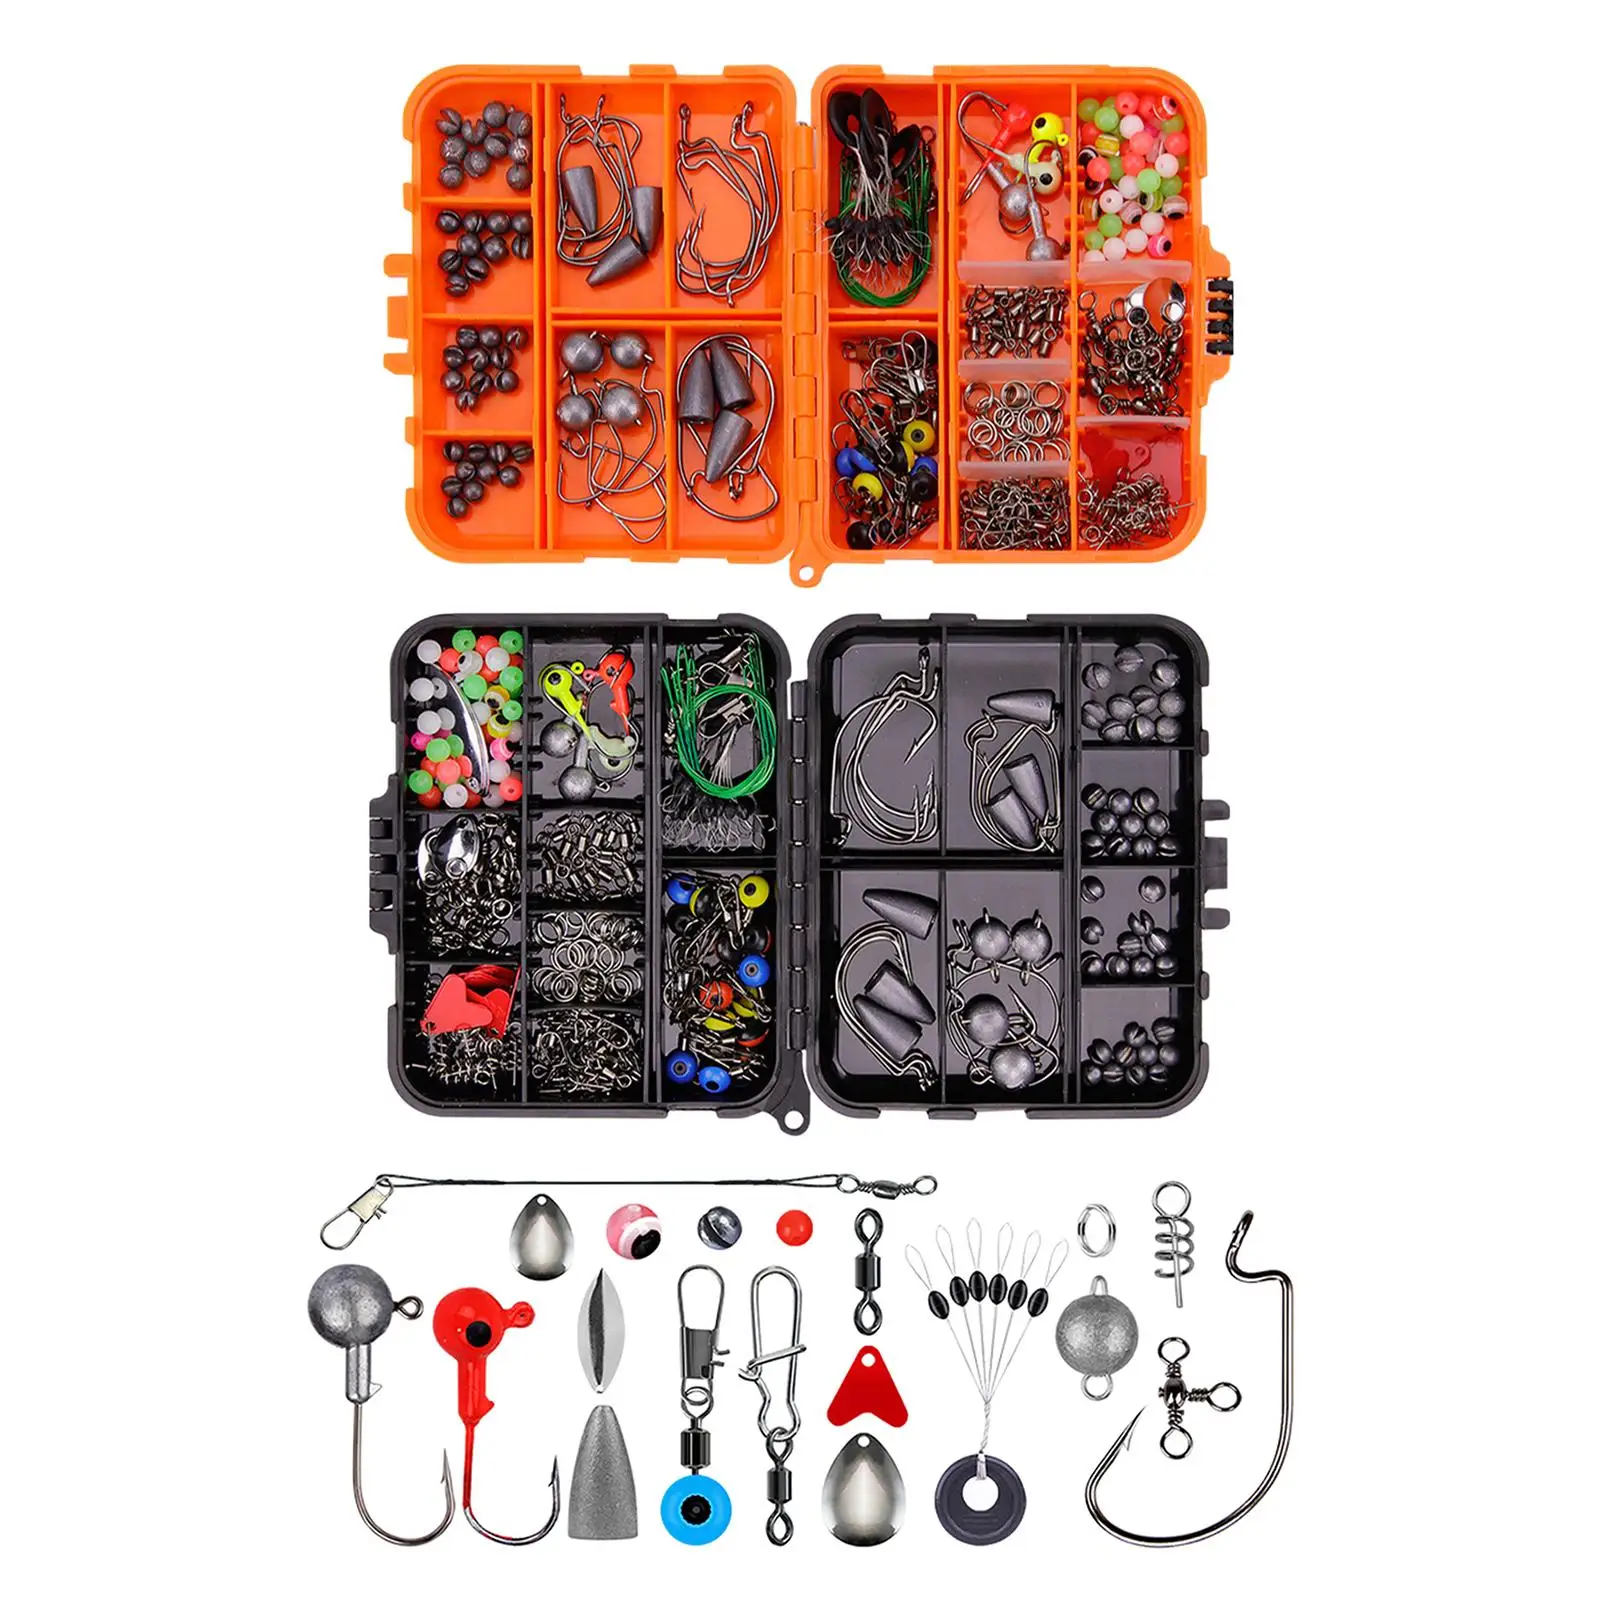 257-piece Fishing Accessory Kit, Including Jig Hooks, Bass Casting Weights, Fishing Swivels,